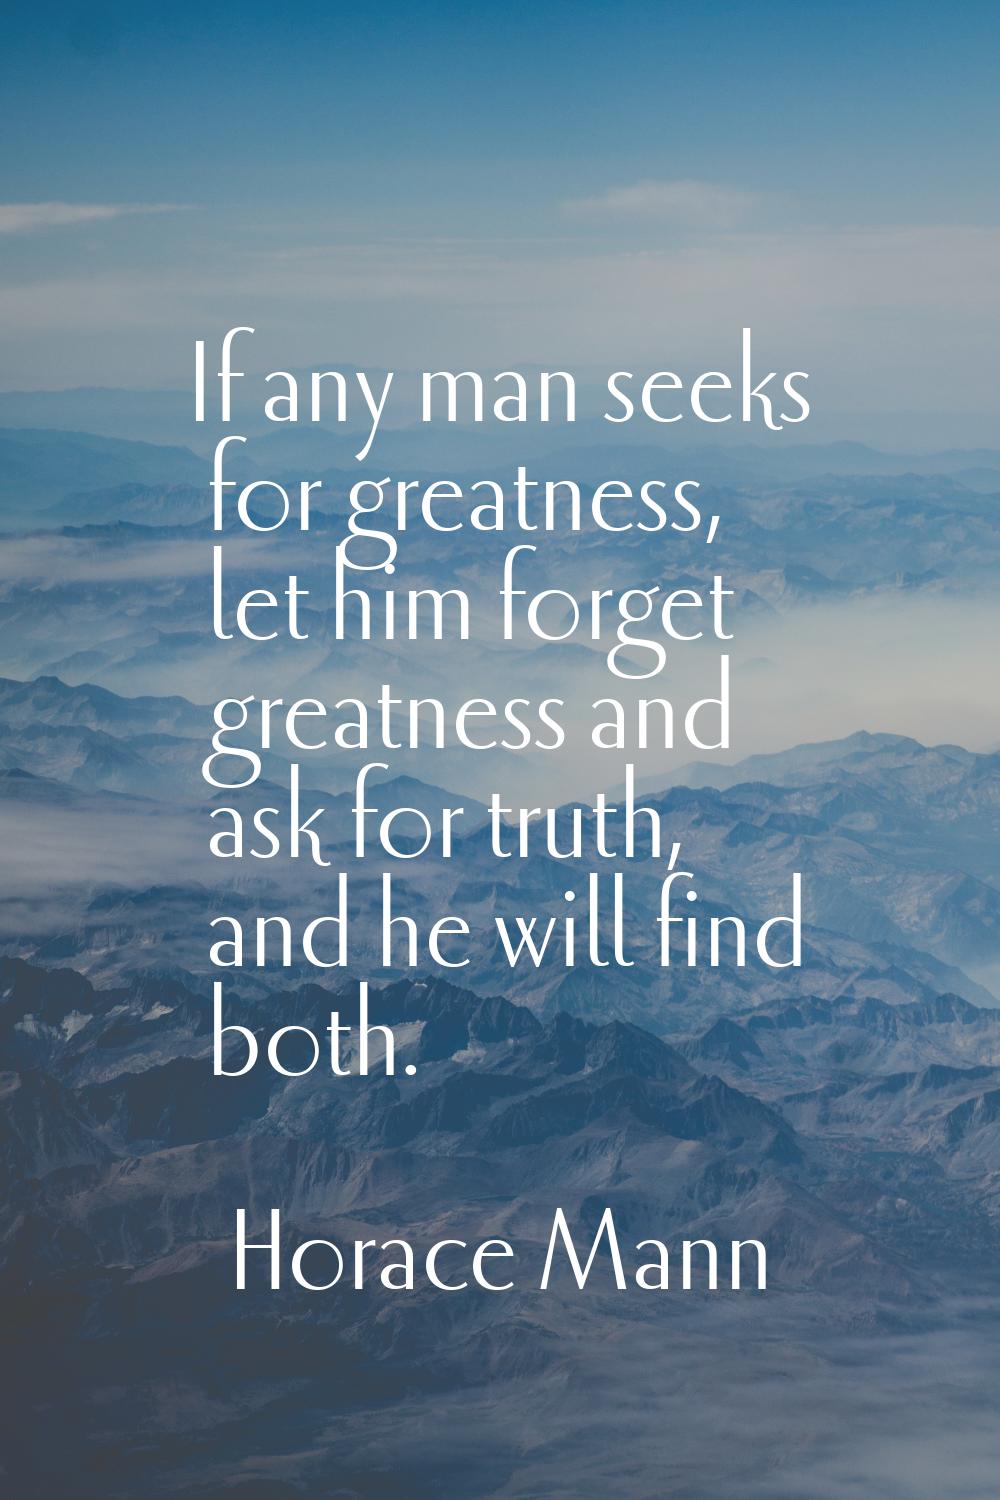 If any man seeks for greatness, let him forget greatness and ask for truth, and he will find both.